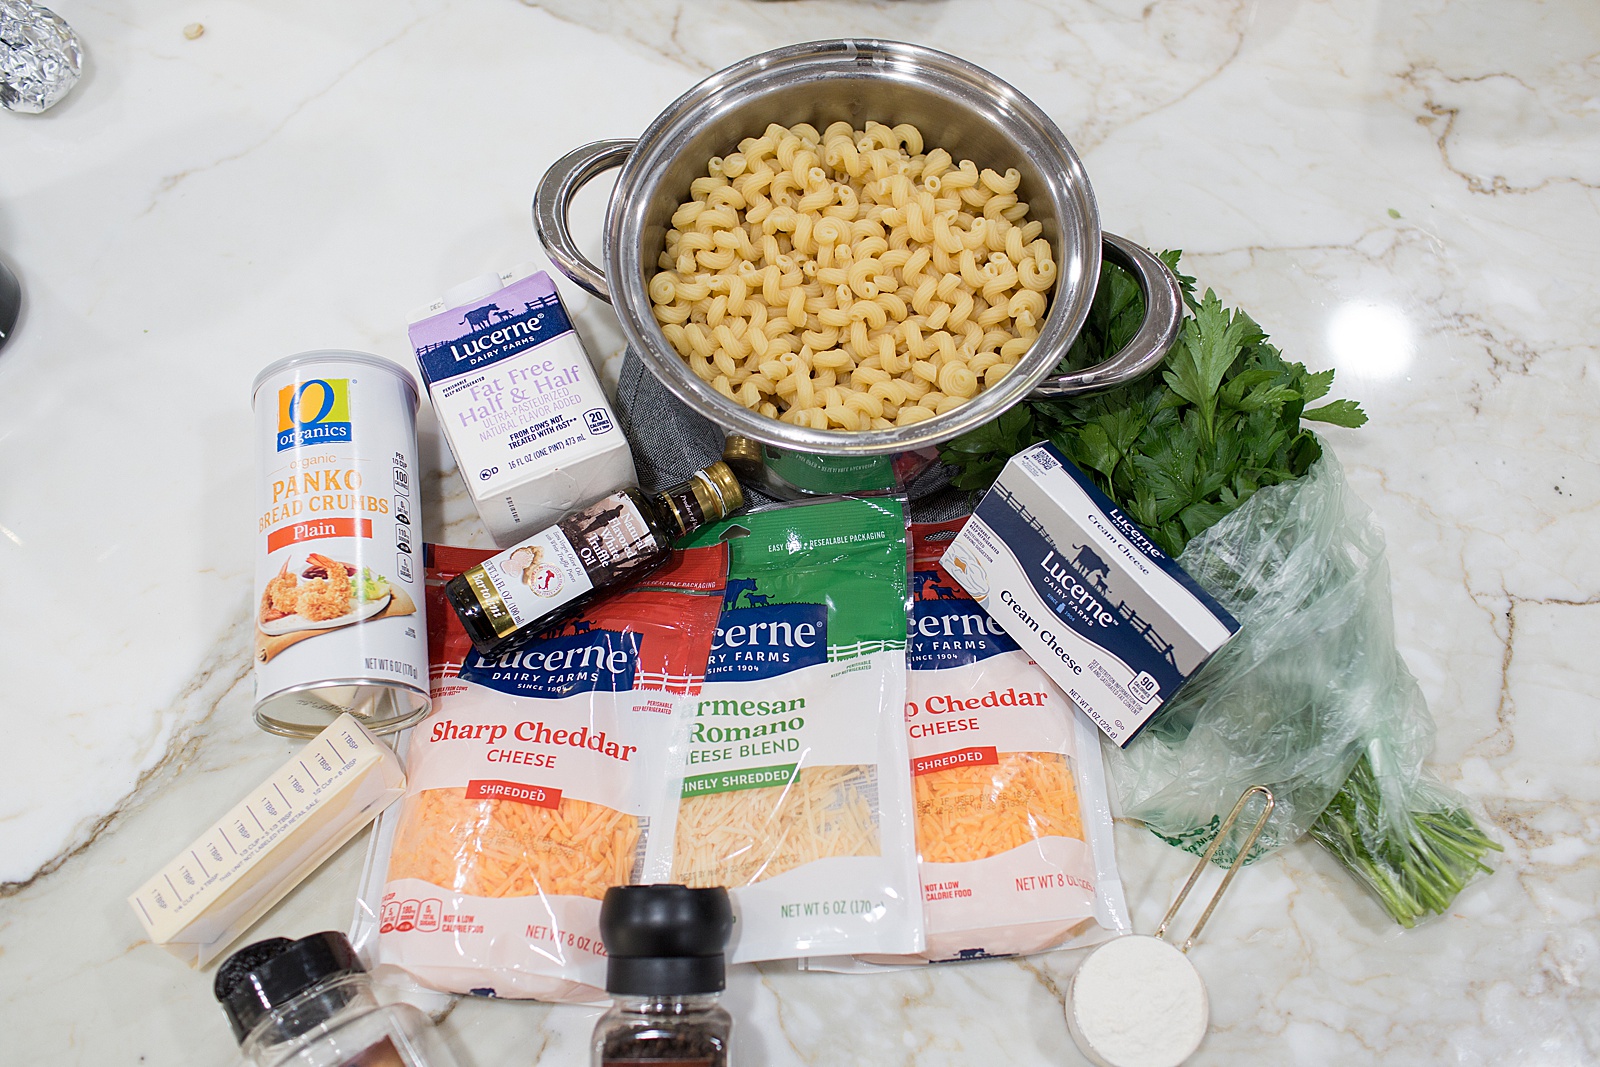 Truffle Mac and Cheese ingredients